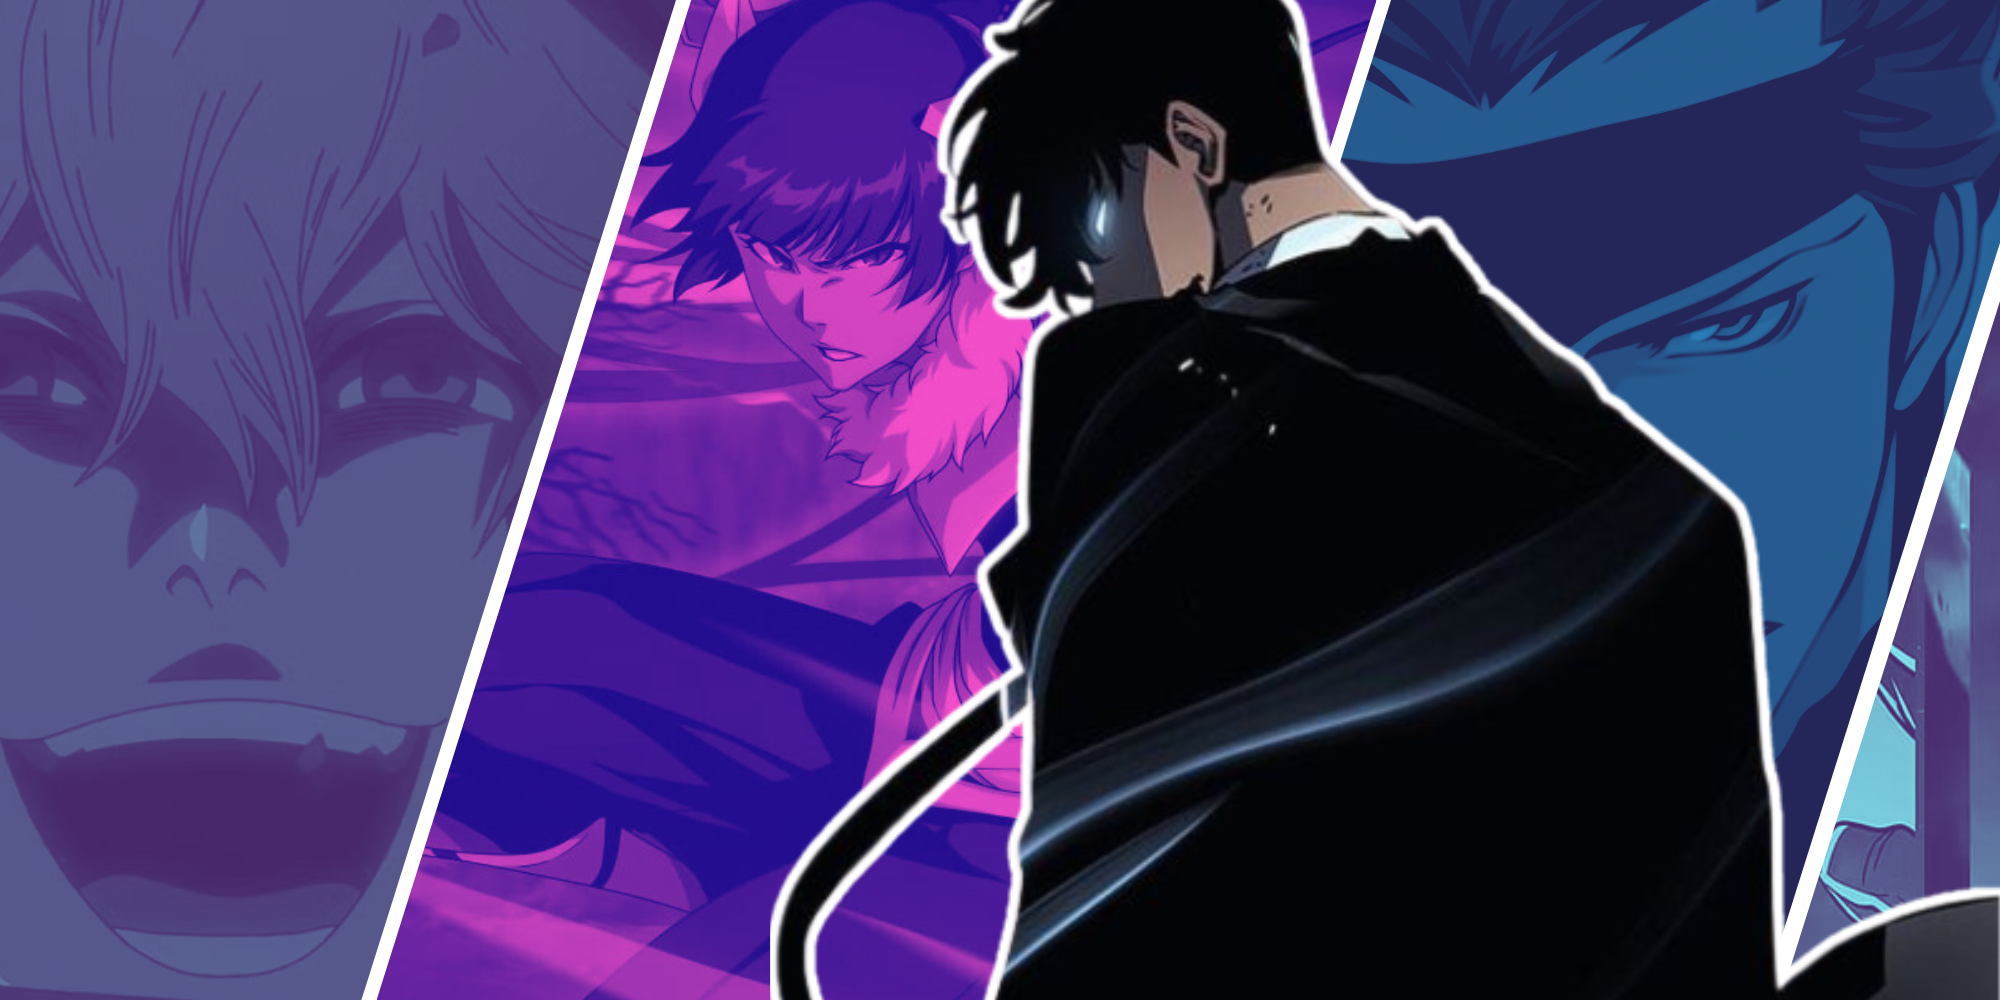 Custom Image of Gremmy, Sui-Feng, Jin-woo, and Aizen